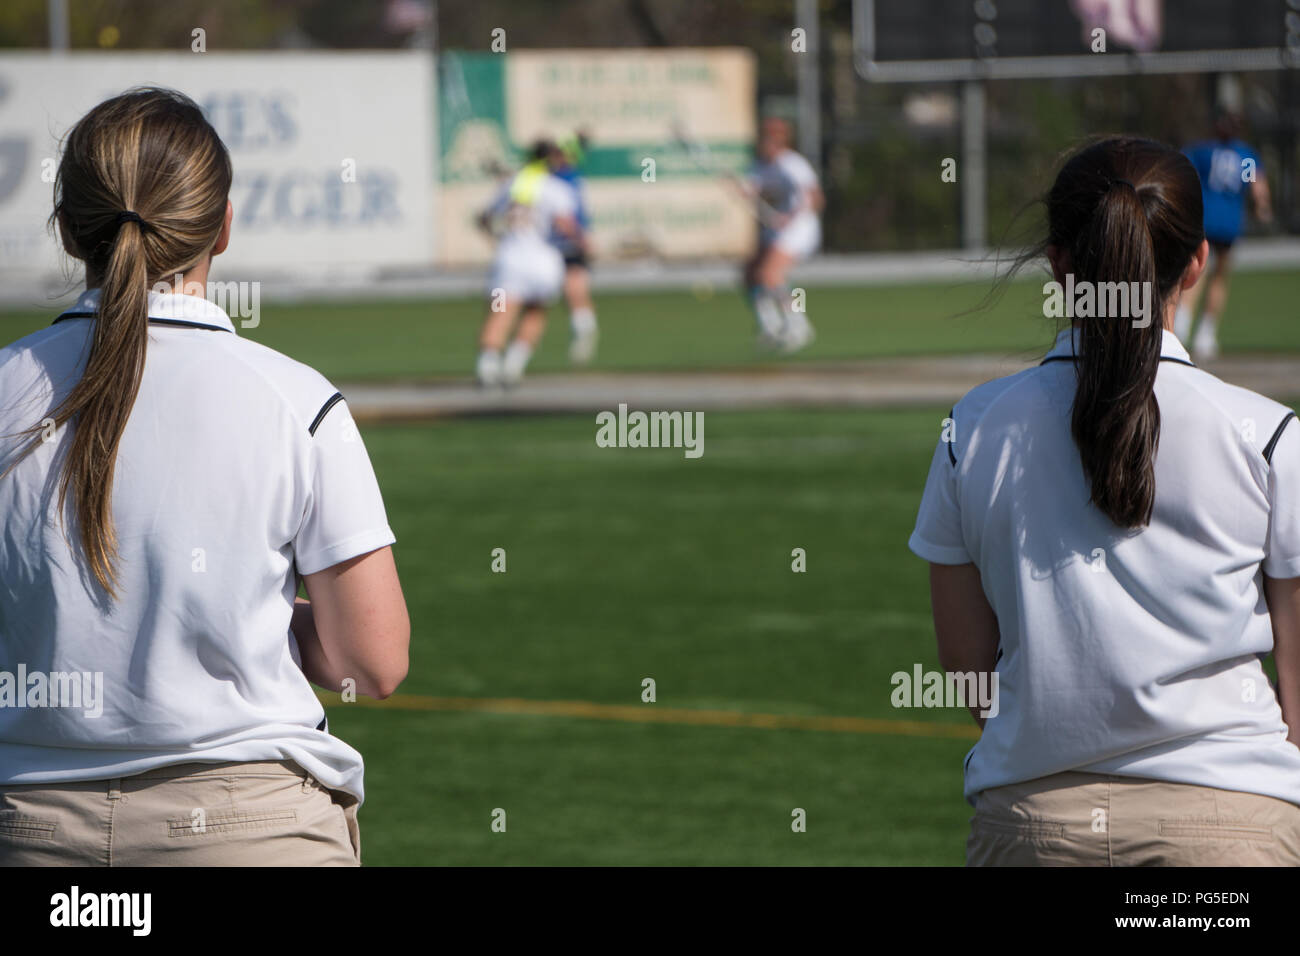 Overlooking a girls lacrosse team sport game two female coaches in uniform colors stand on sideline watching play calling instructions to players on f Stock Photo